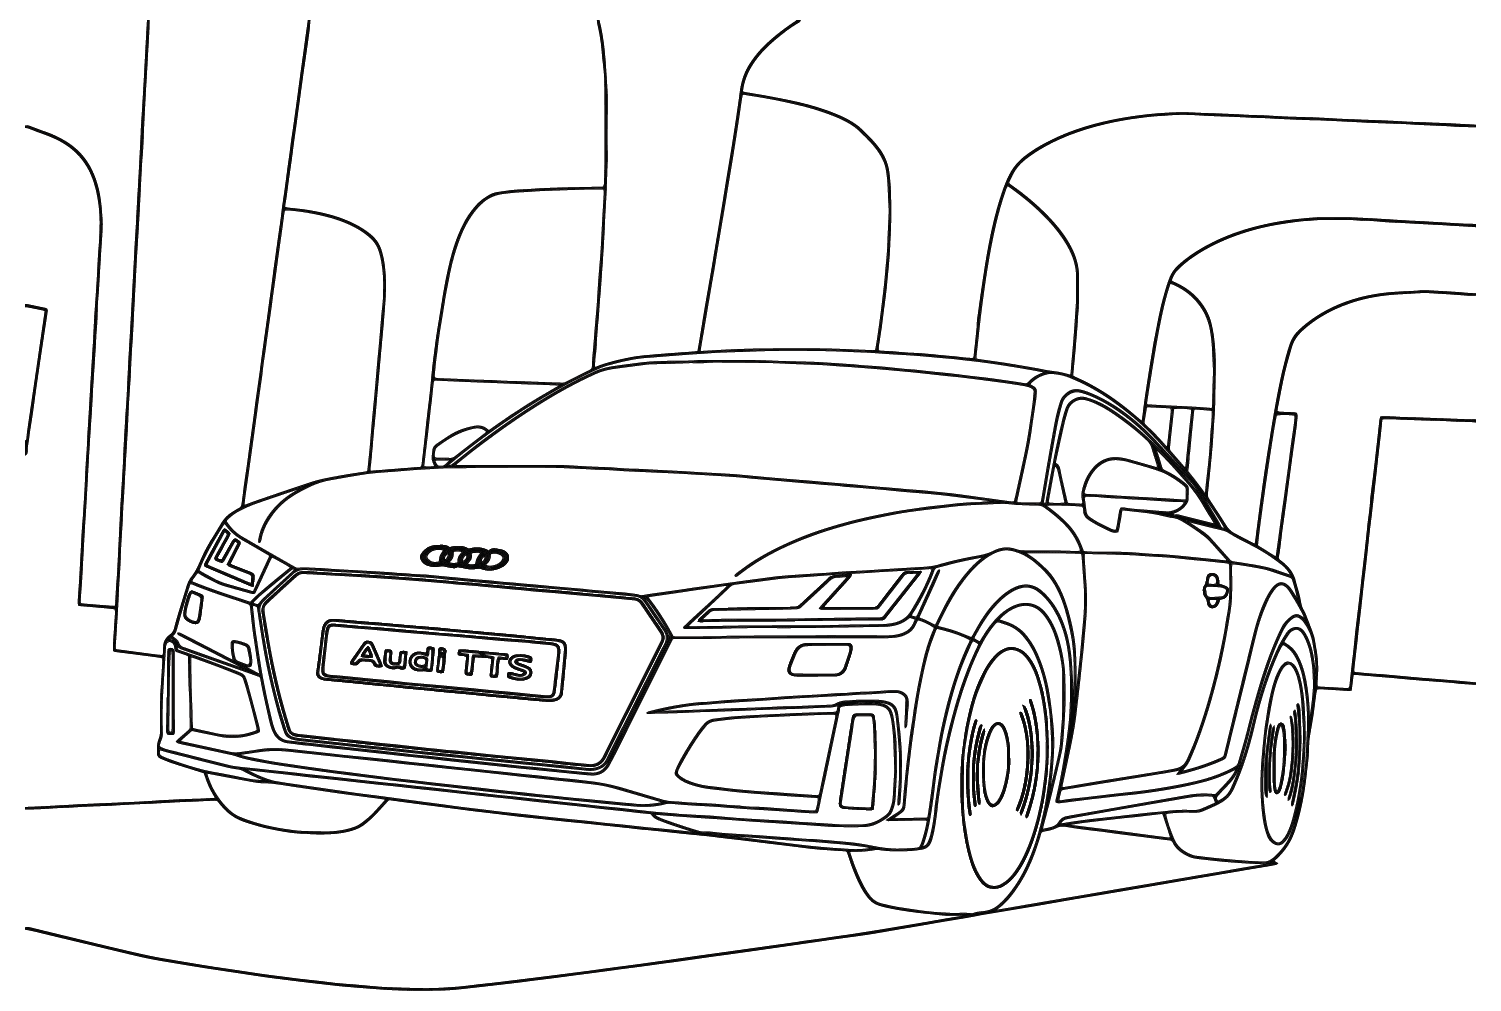 Audi TTS Coloring Page from Audi